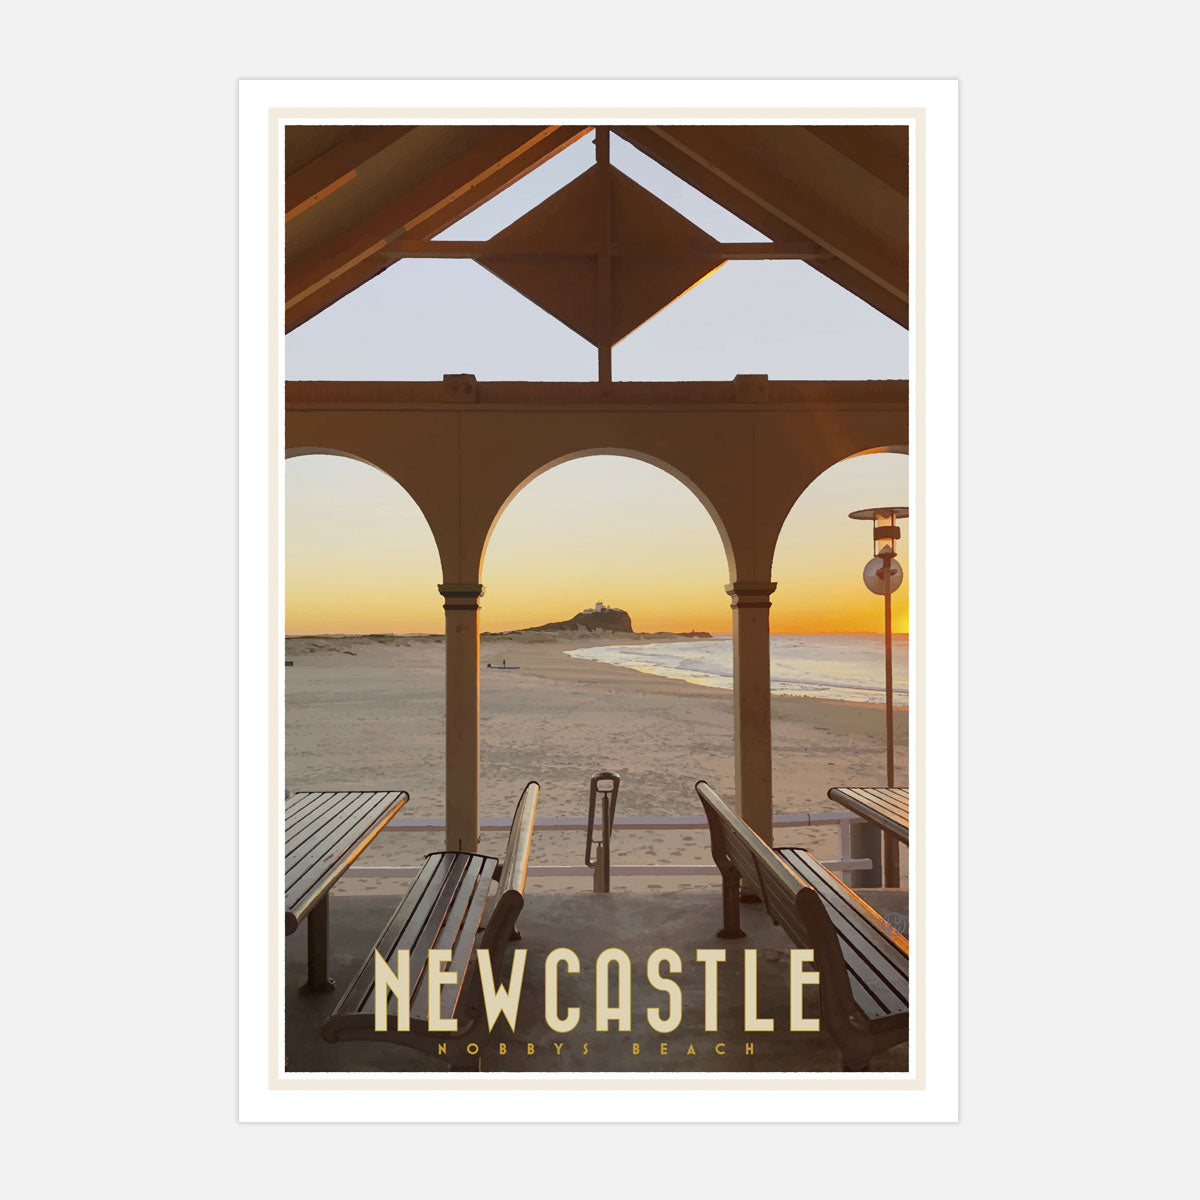 Newcastle NSW poster vintage travel style designed by Places We Luv